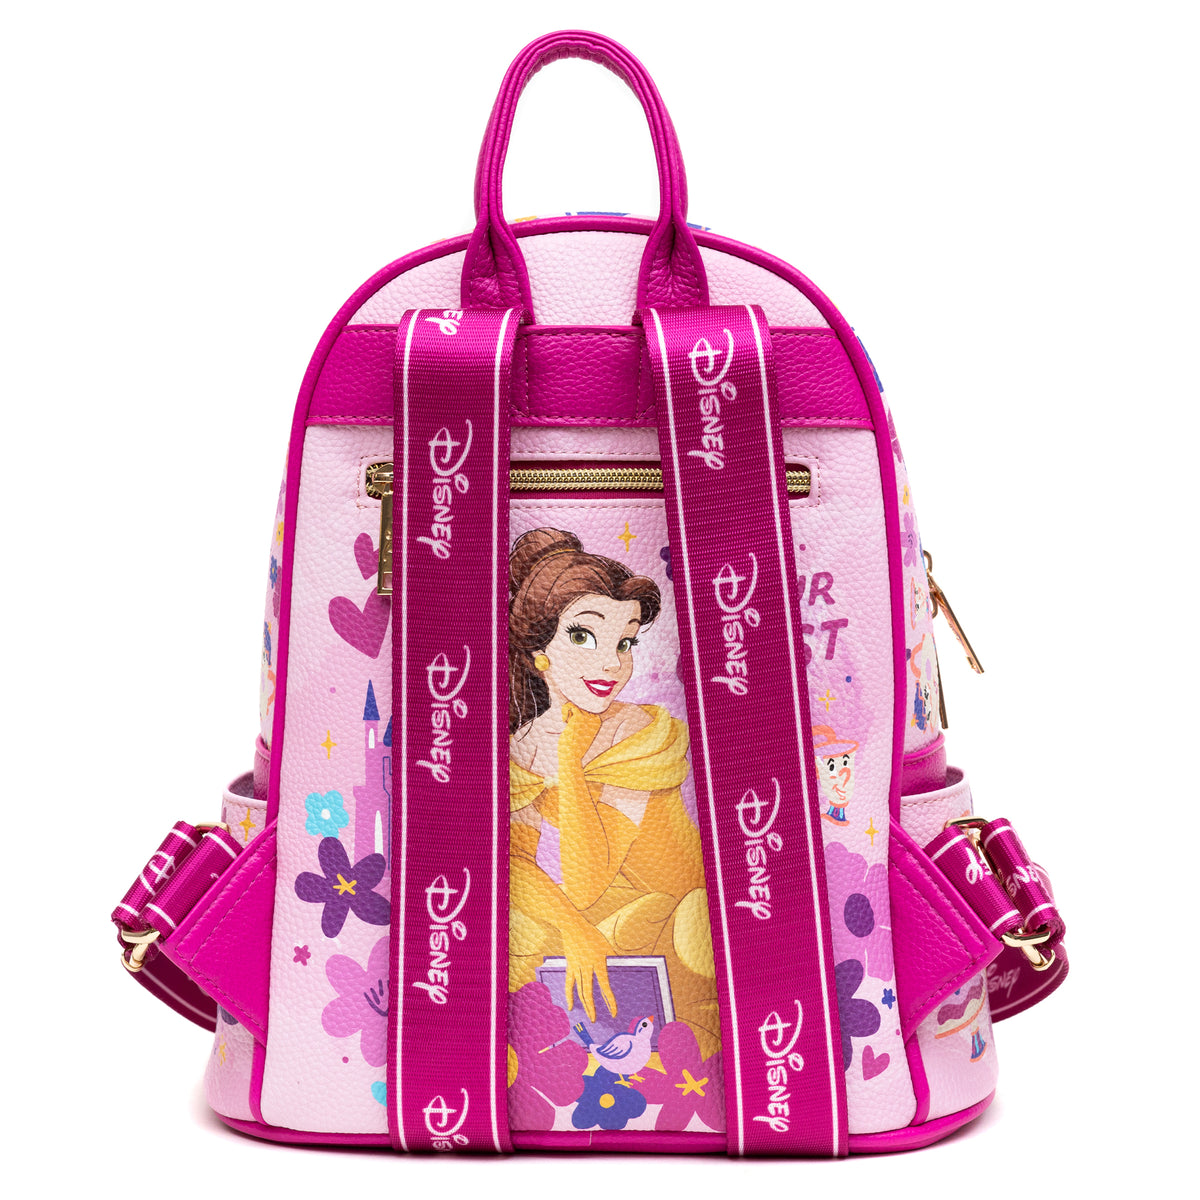 Disney Princess Beauty and the Beast Mini Backpack - Limited Edition